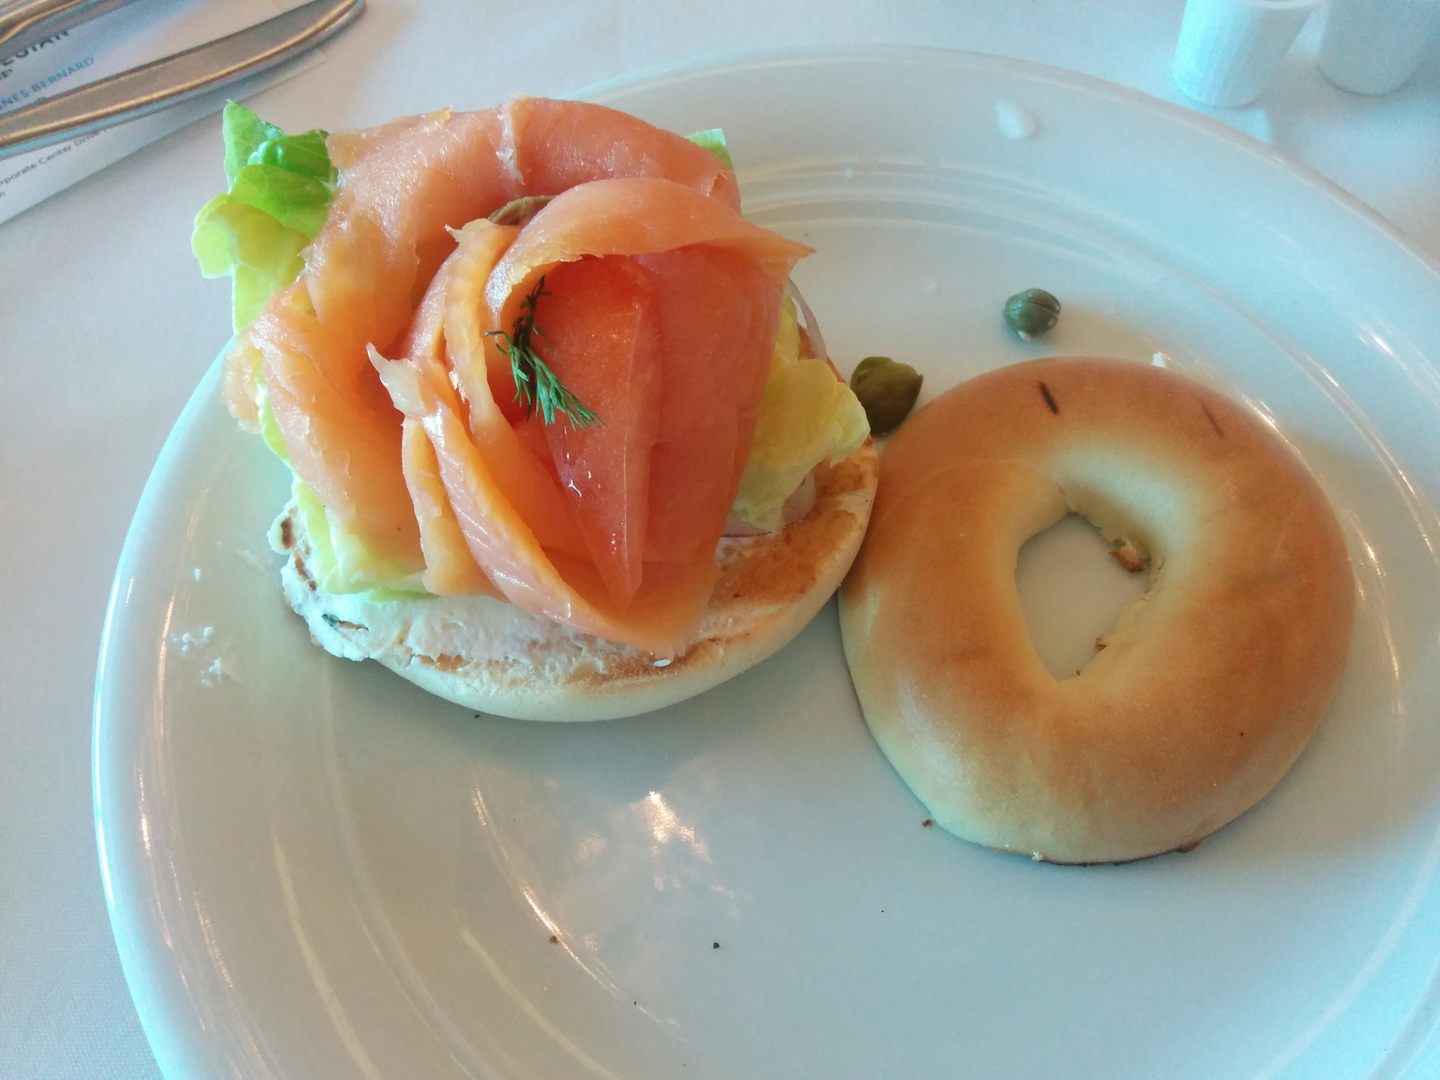 Smoked salmon and cream cheese on a toasted bagel, one of the daily breakfast entrees. Very tasty and fresh!